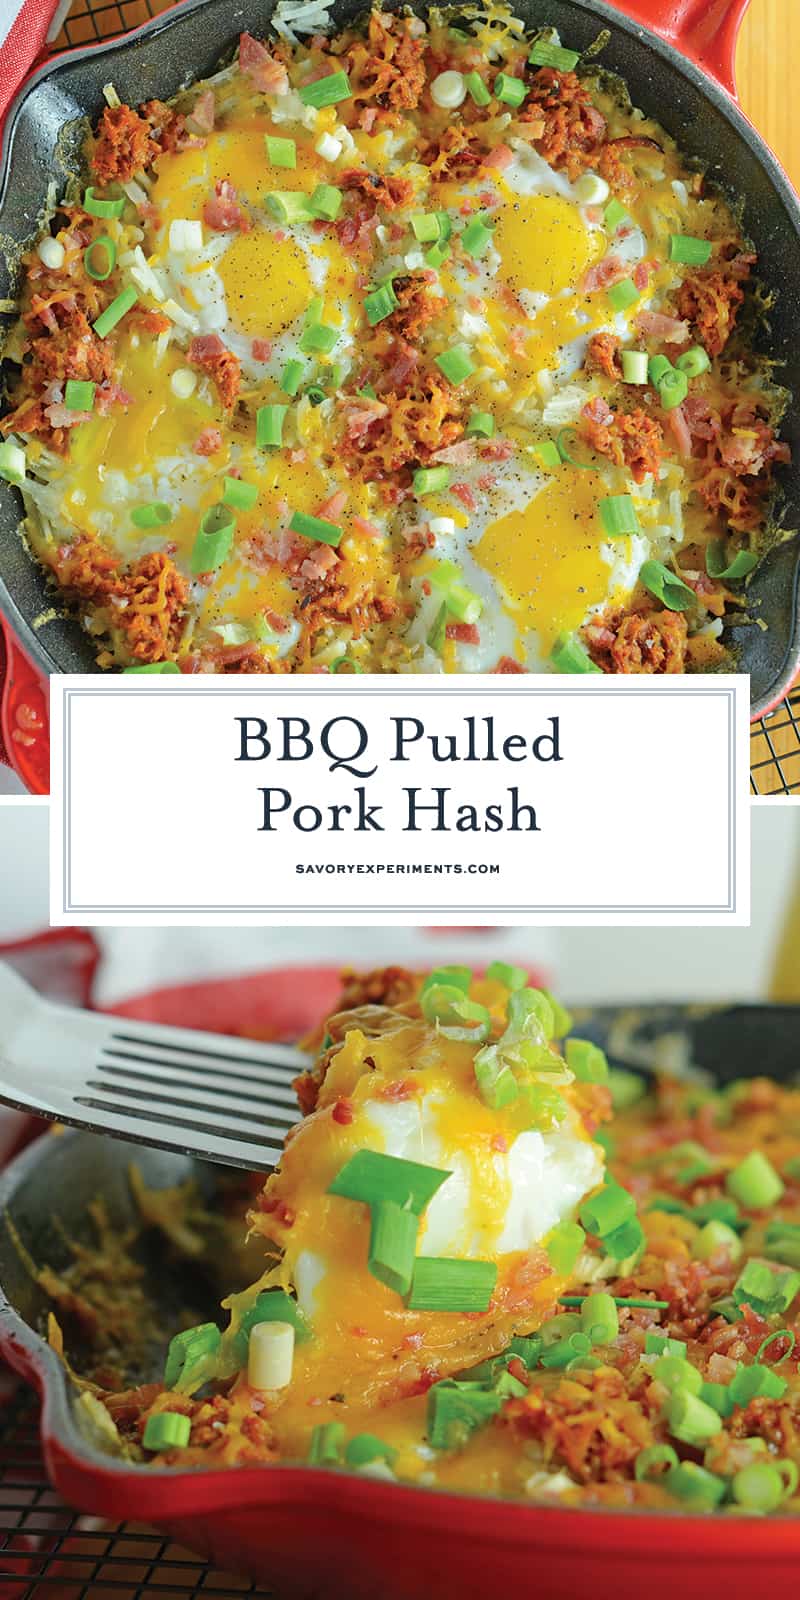 BBQ Pulled Pork Hash is my hands down, favorite Sunday brunch recipe. Ready in only 15 minutes and easily modified, it is simple and tasty. #bbqpulledpork #breakfasthash www.savoryexperiments.com 